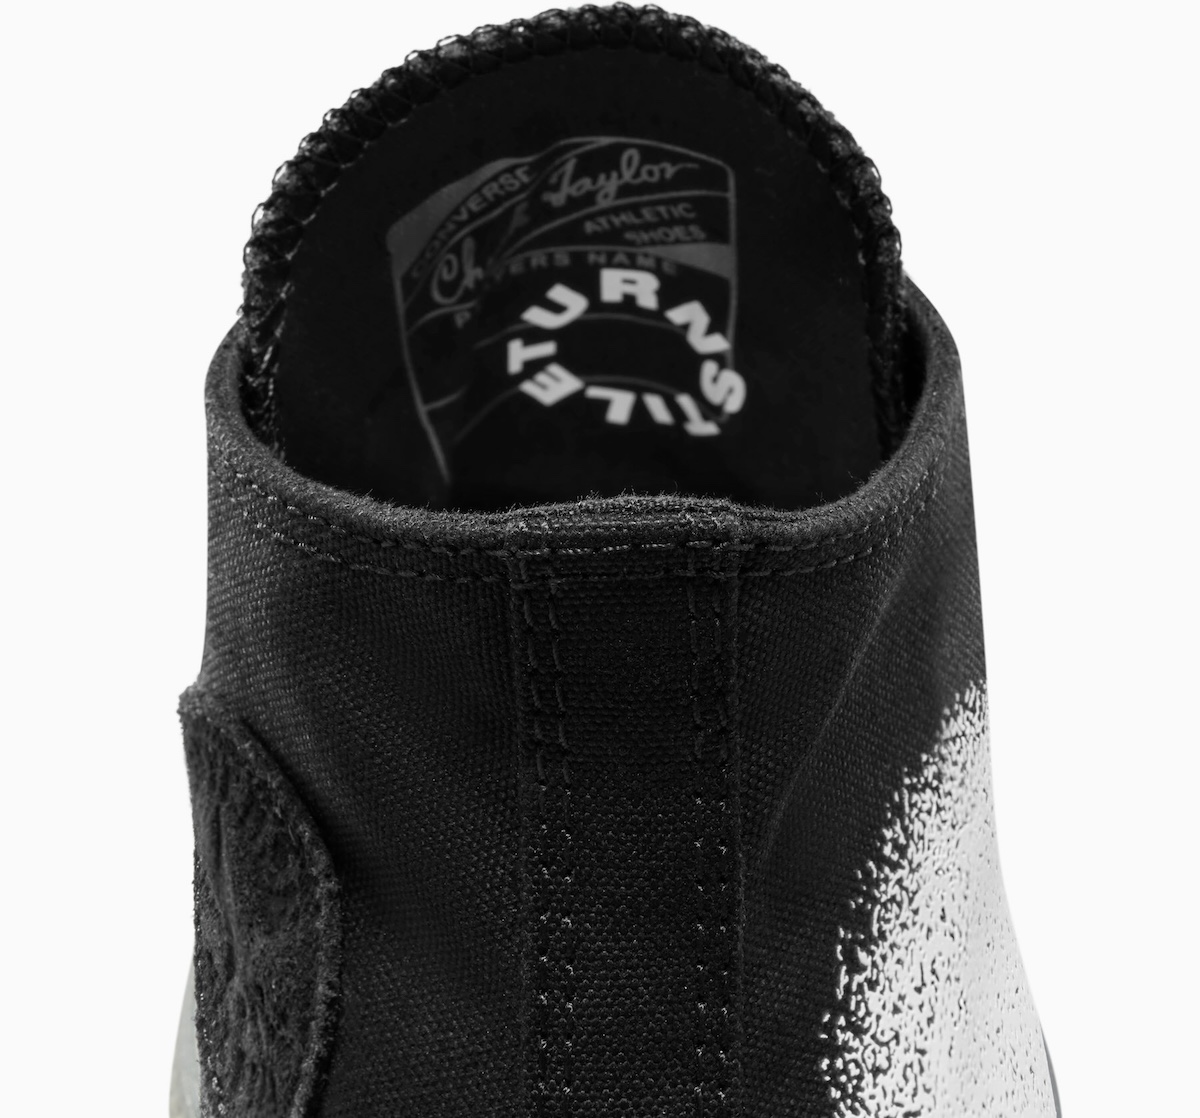 Converse x A-COLD-WALL ERX 260 sneakers